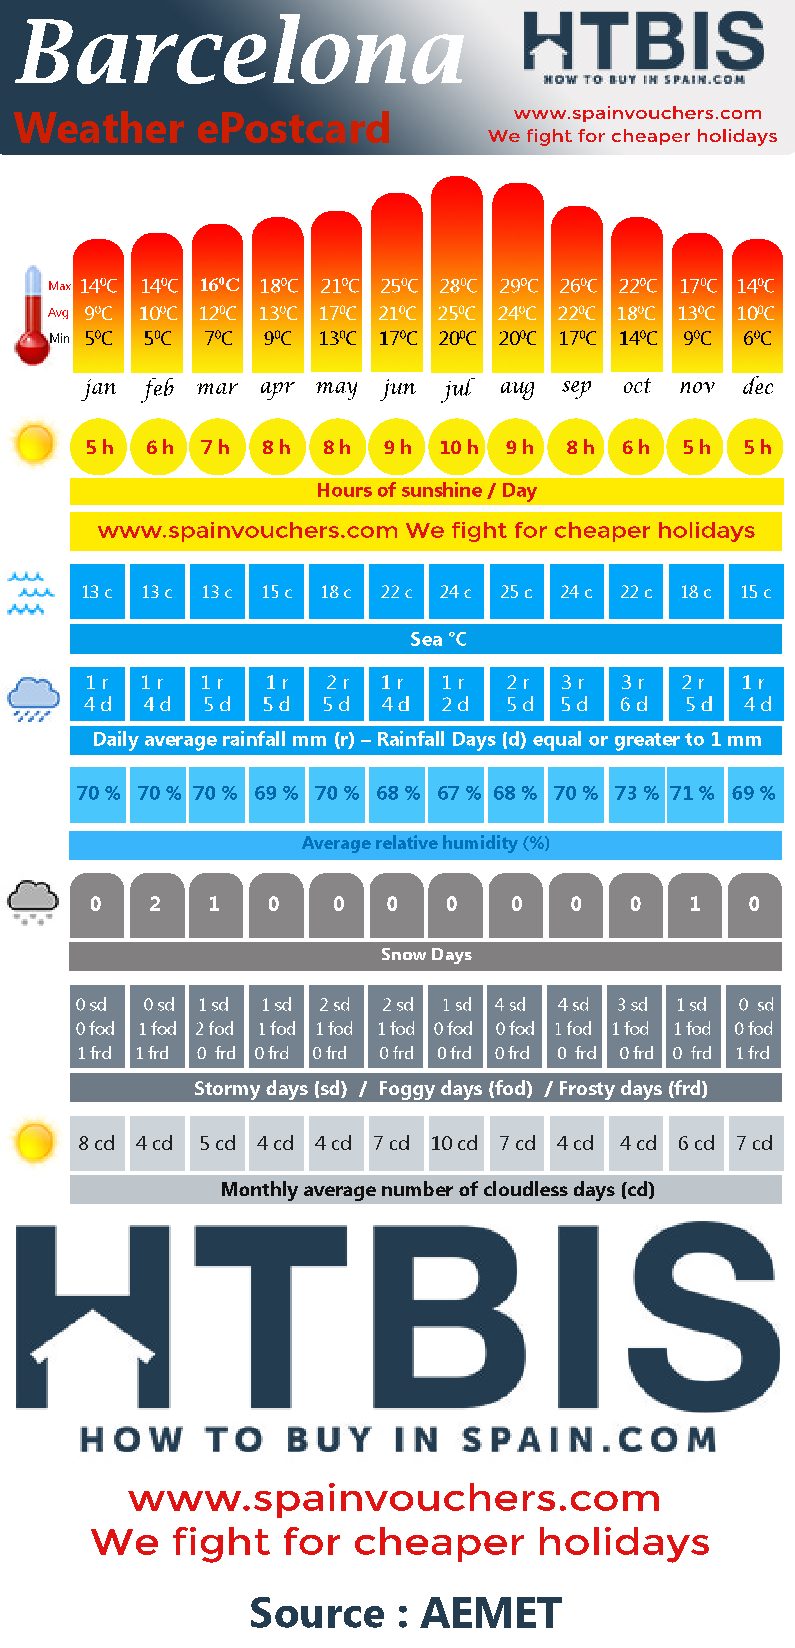 Barcelona, Weather statistic Infographic